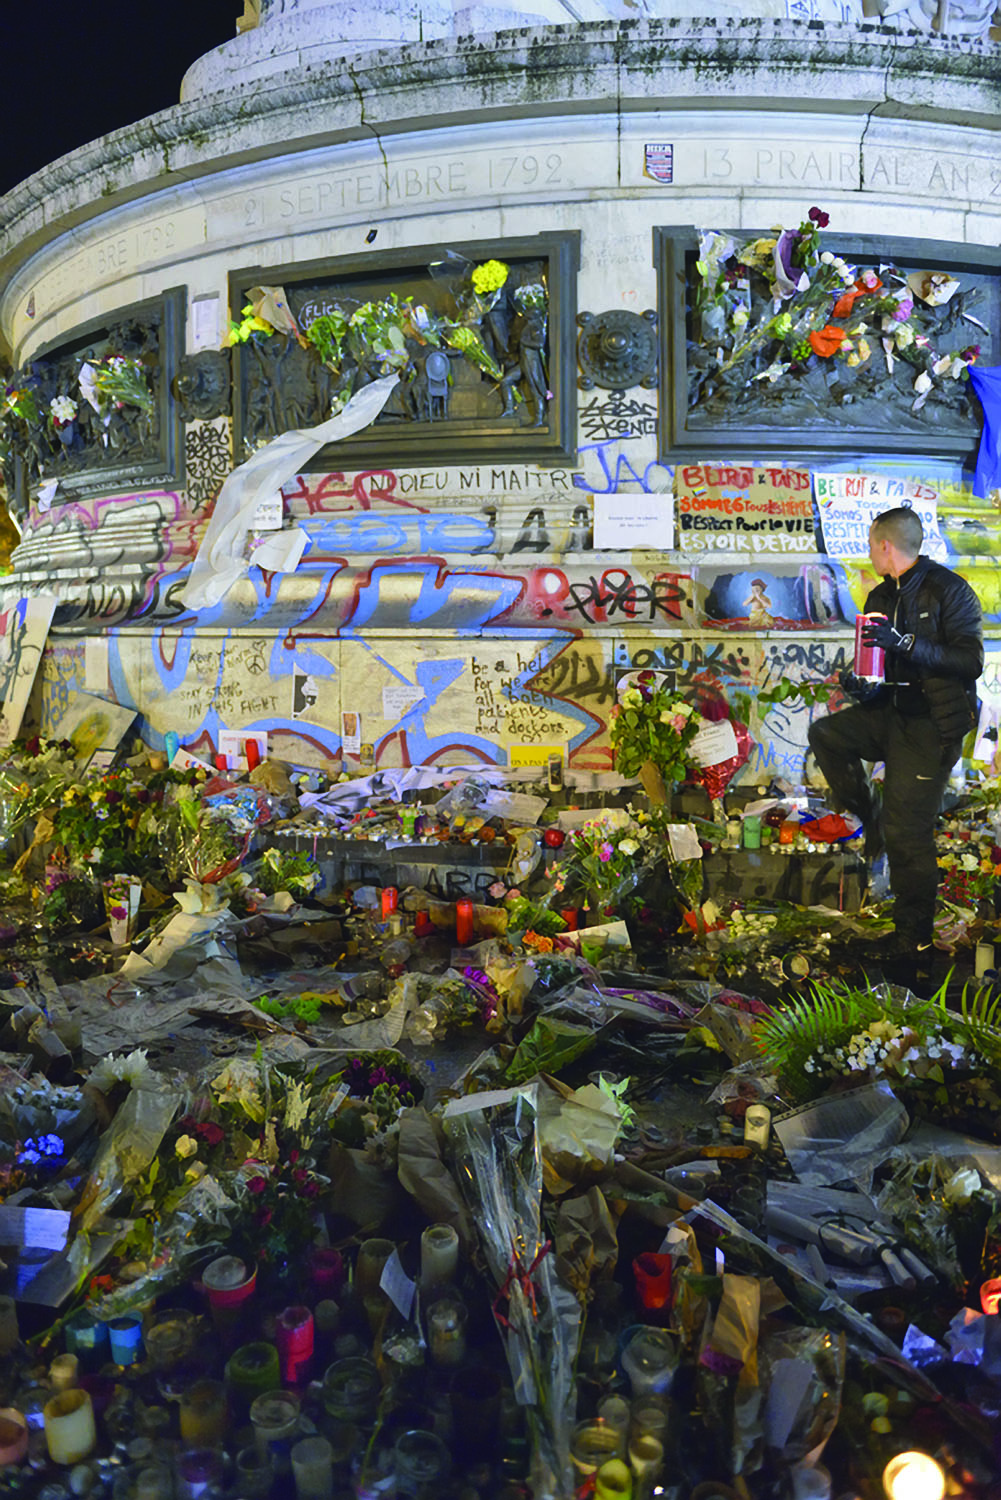 Messages and floral tributes commemorate the victims of terrorism